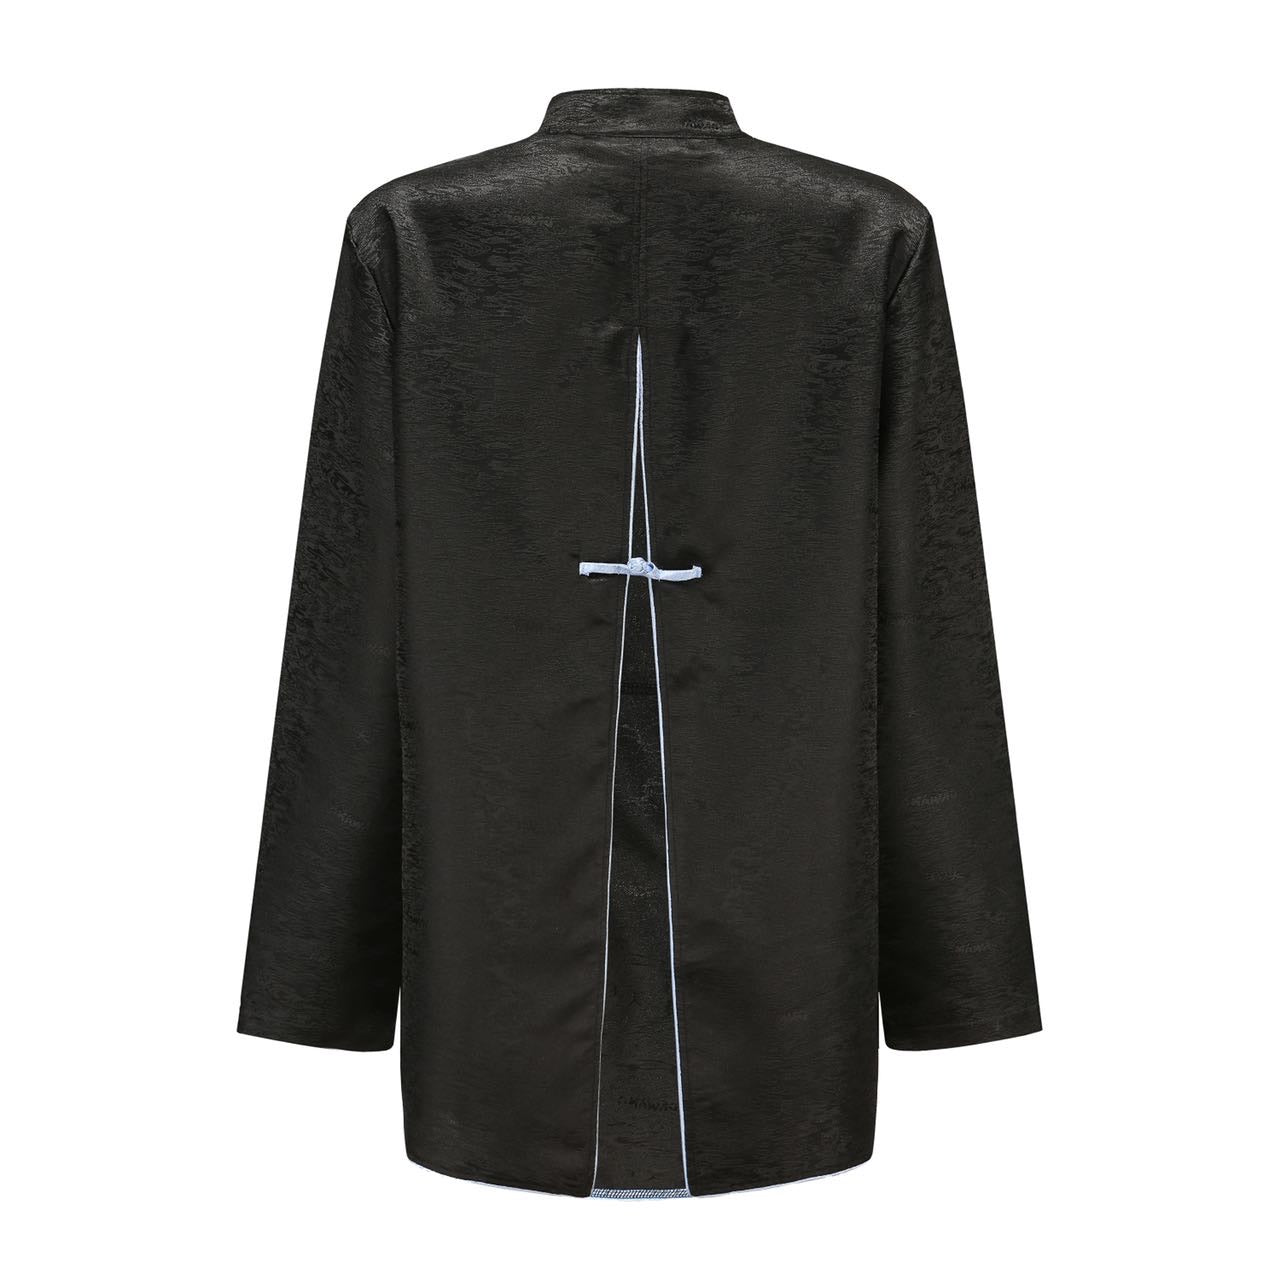 Yi Open Back Side Collar Suit